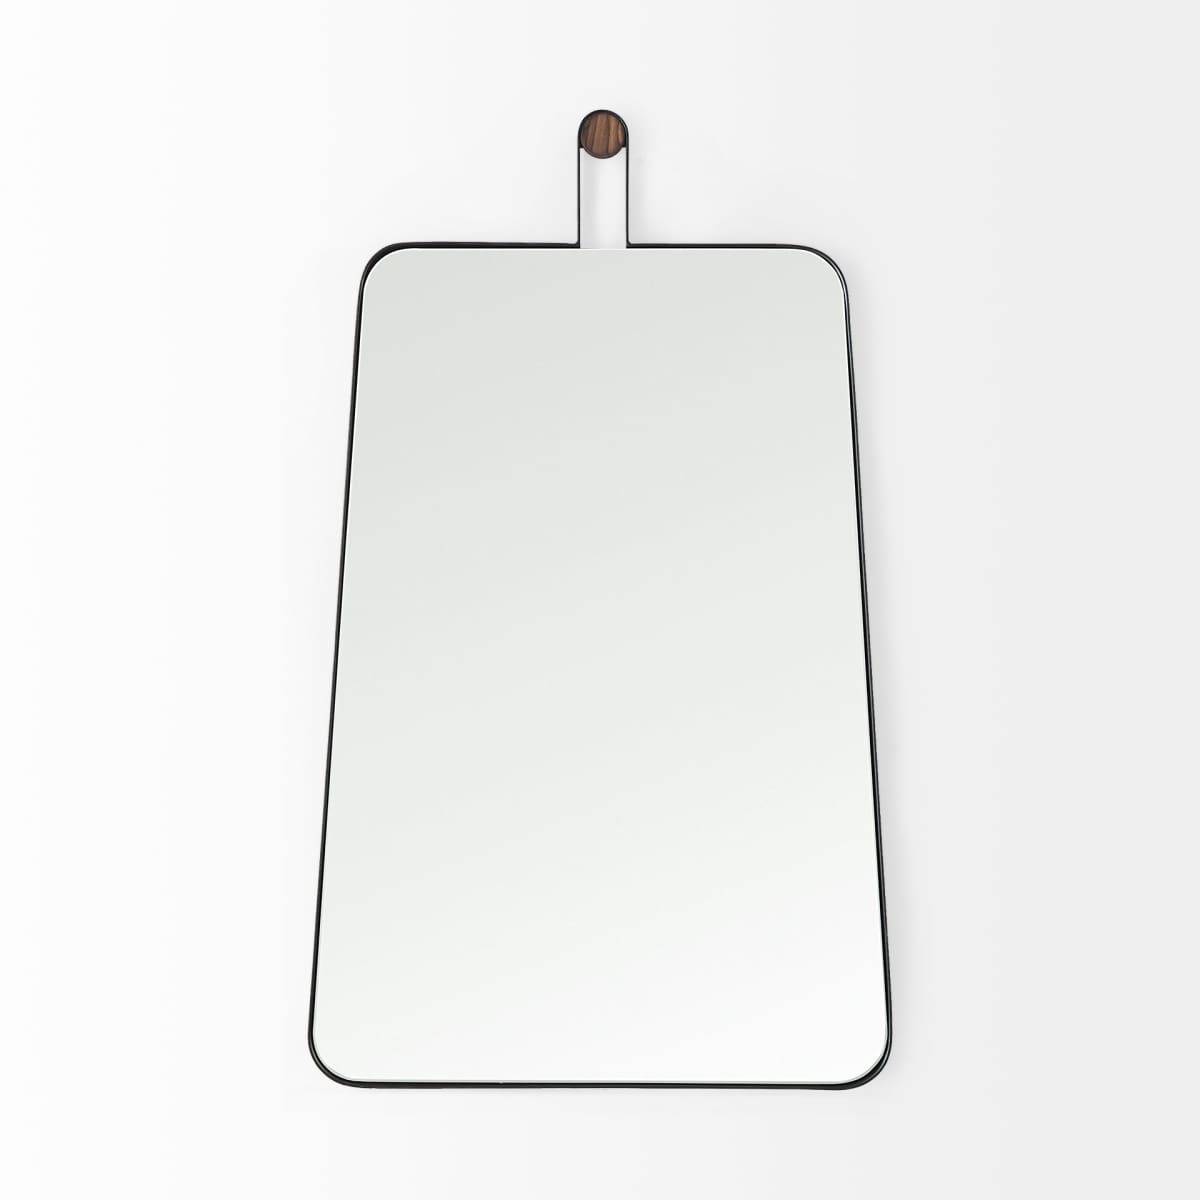 Collie Wall Mirror Black Metal | 22x36 - wall-mirrors-grouped